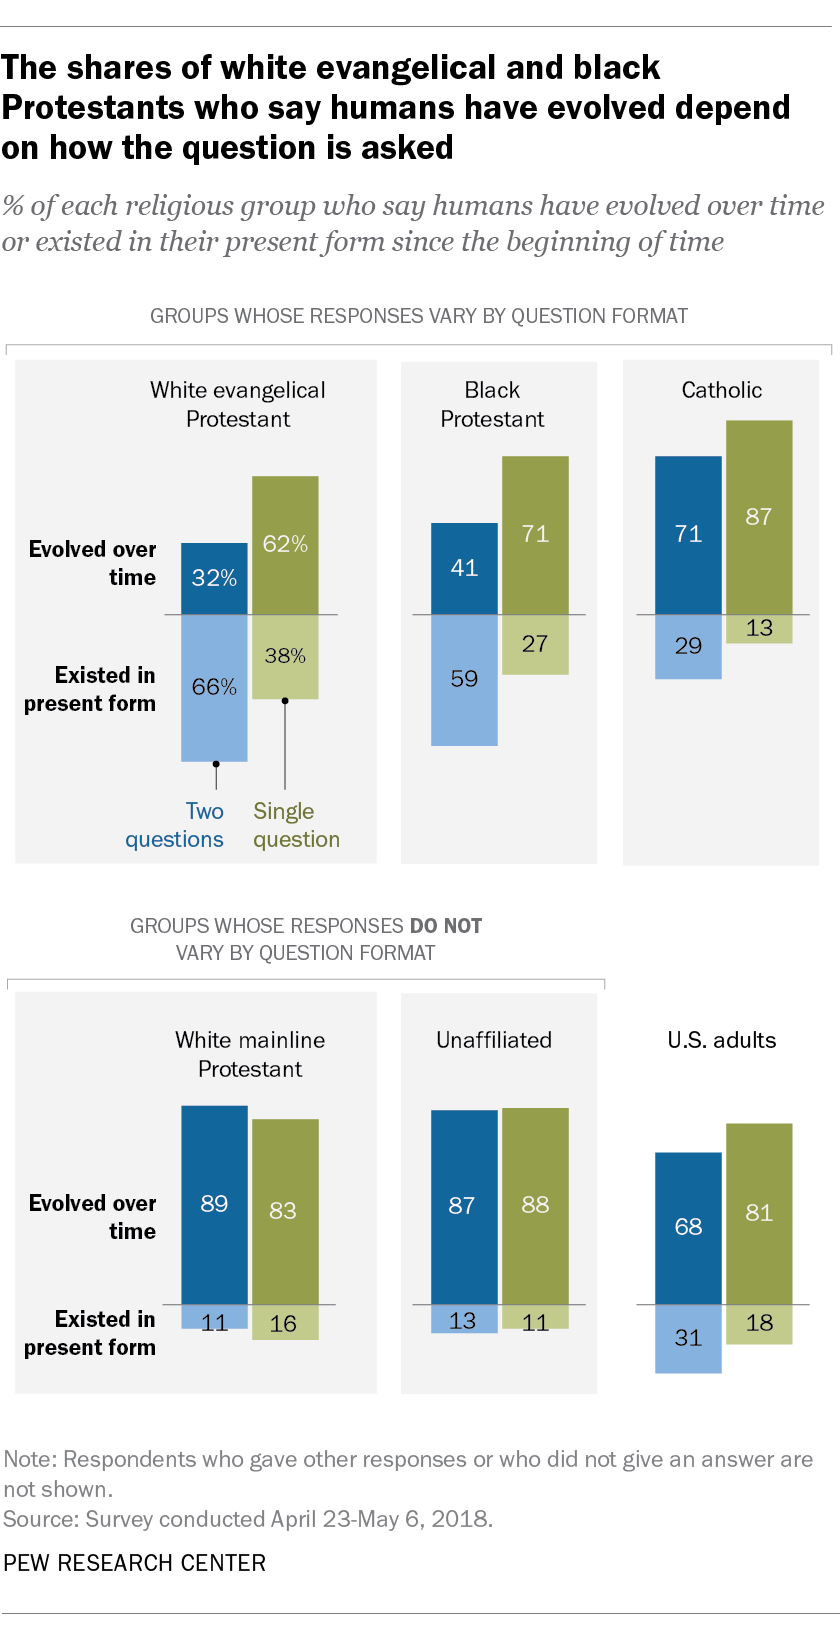 The share of white evangelical and black Protestants who say humans have evolved depend on how the question is asked